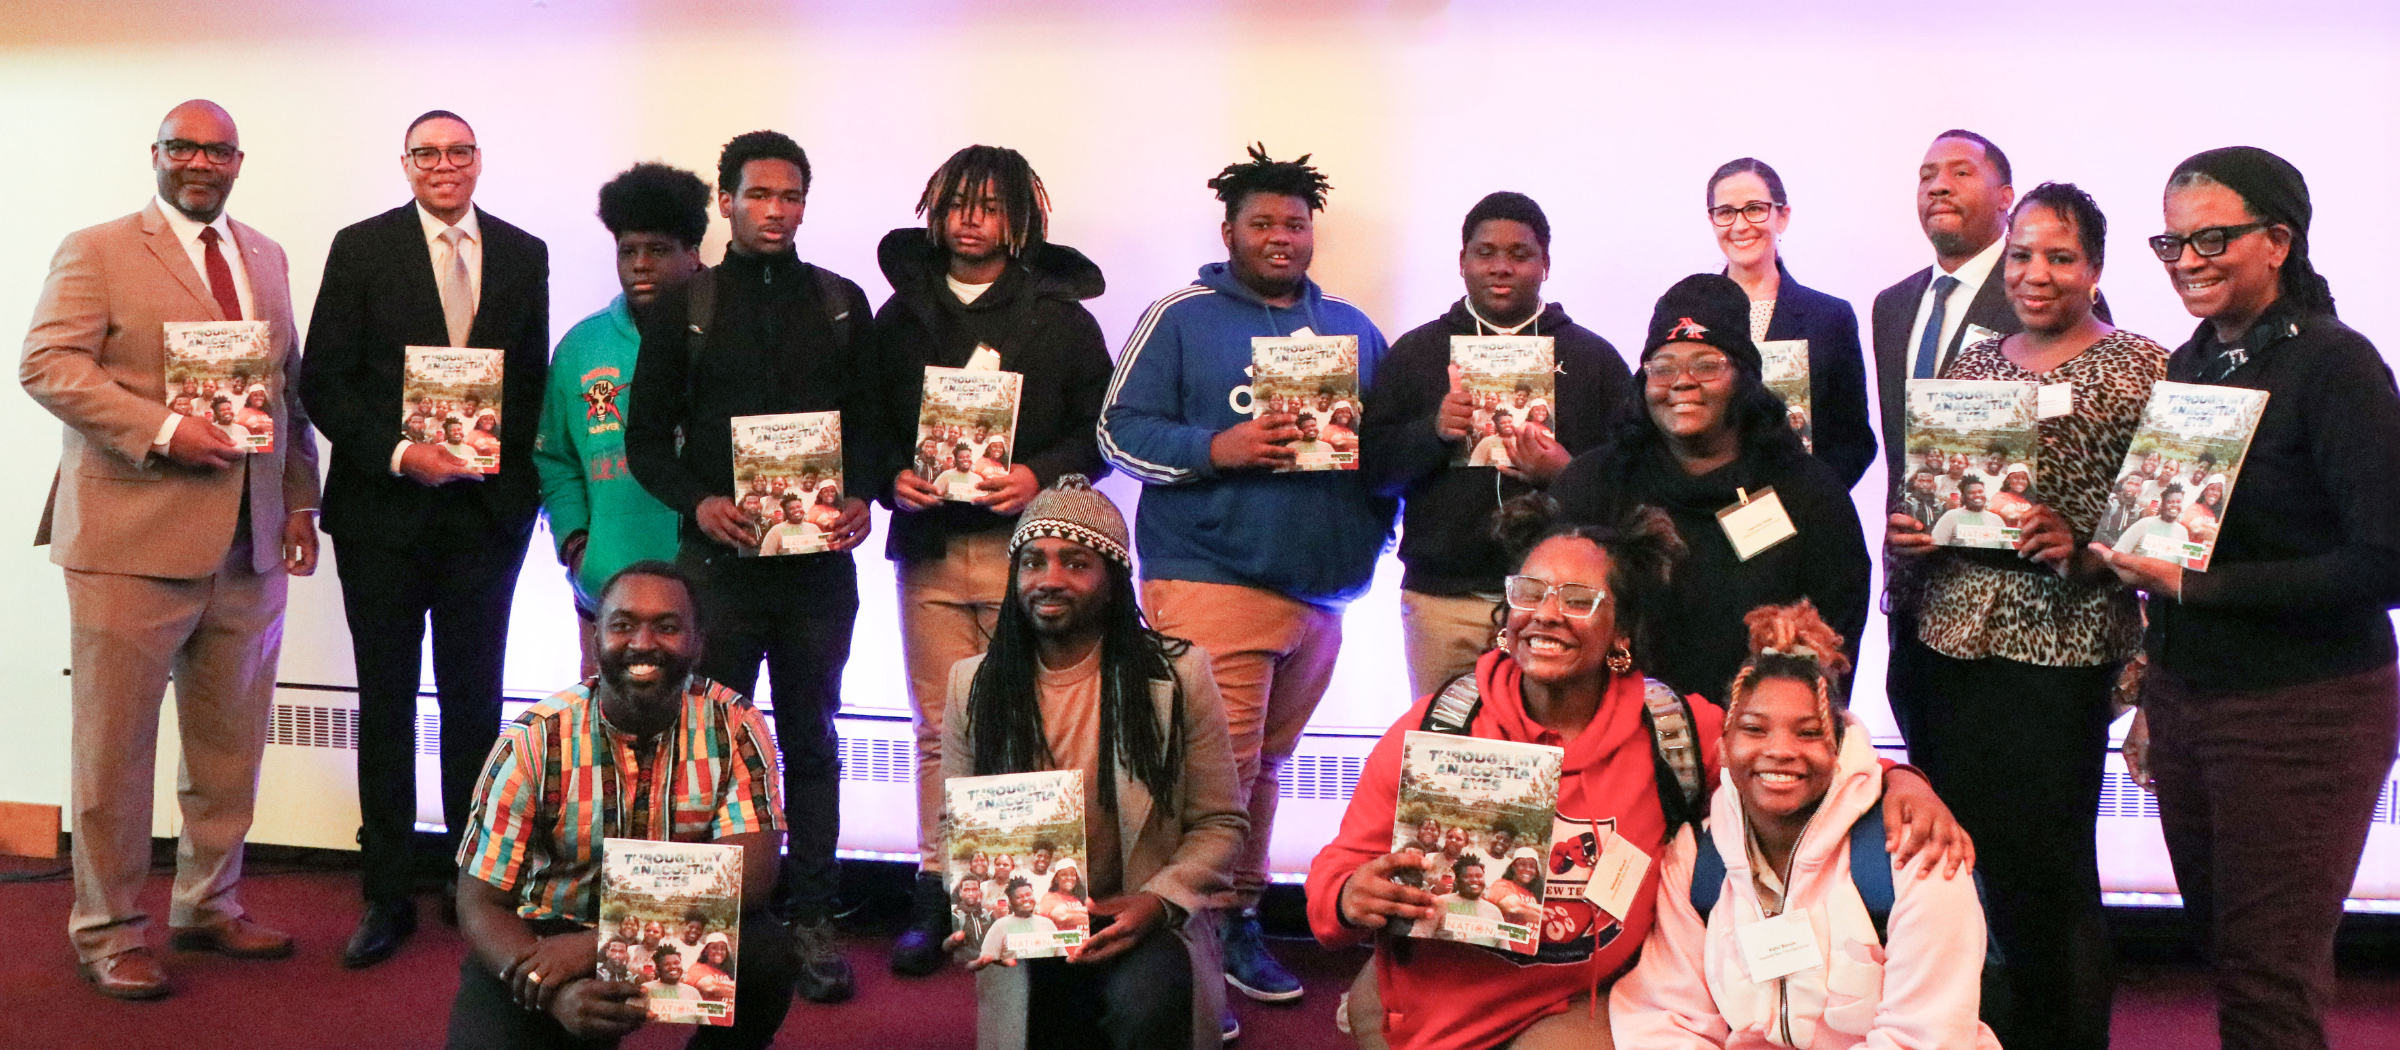 Anacostia students explore environmental issues in new book